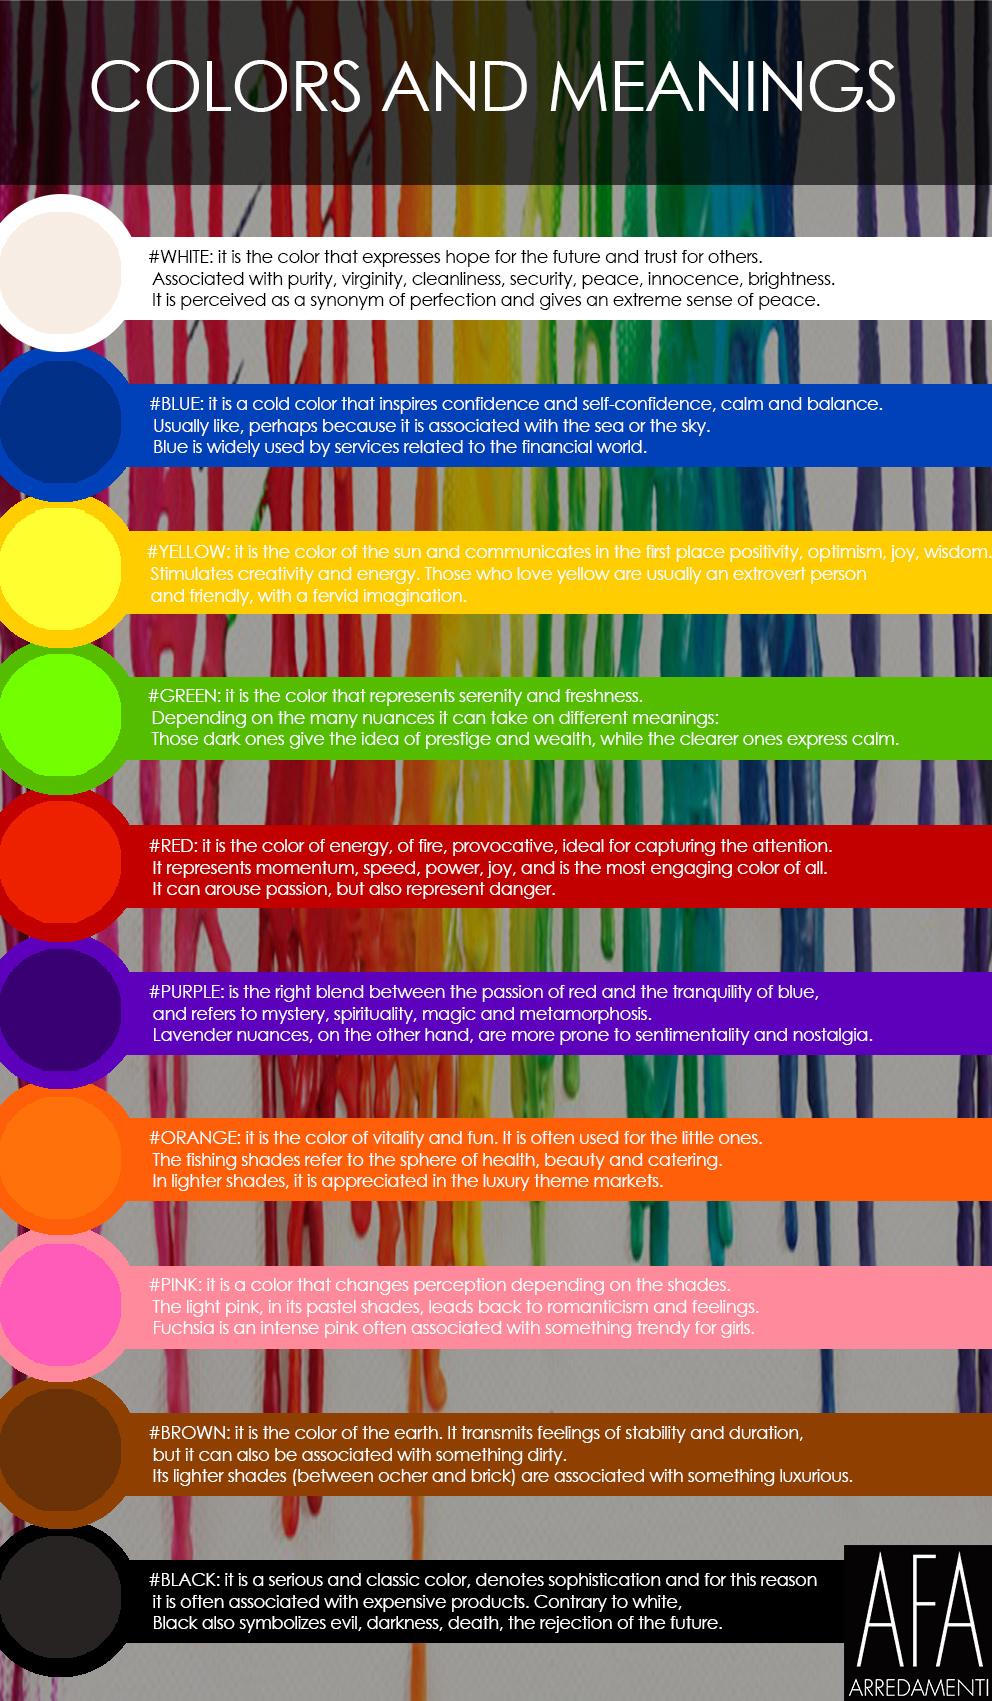 Colors and meanings infographic